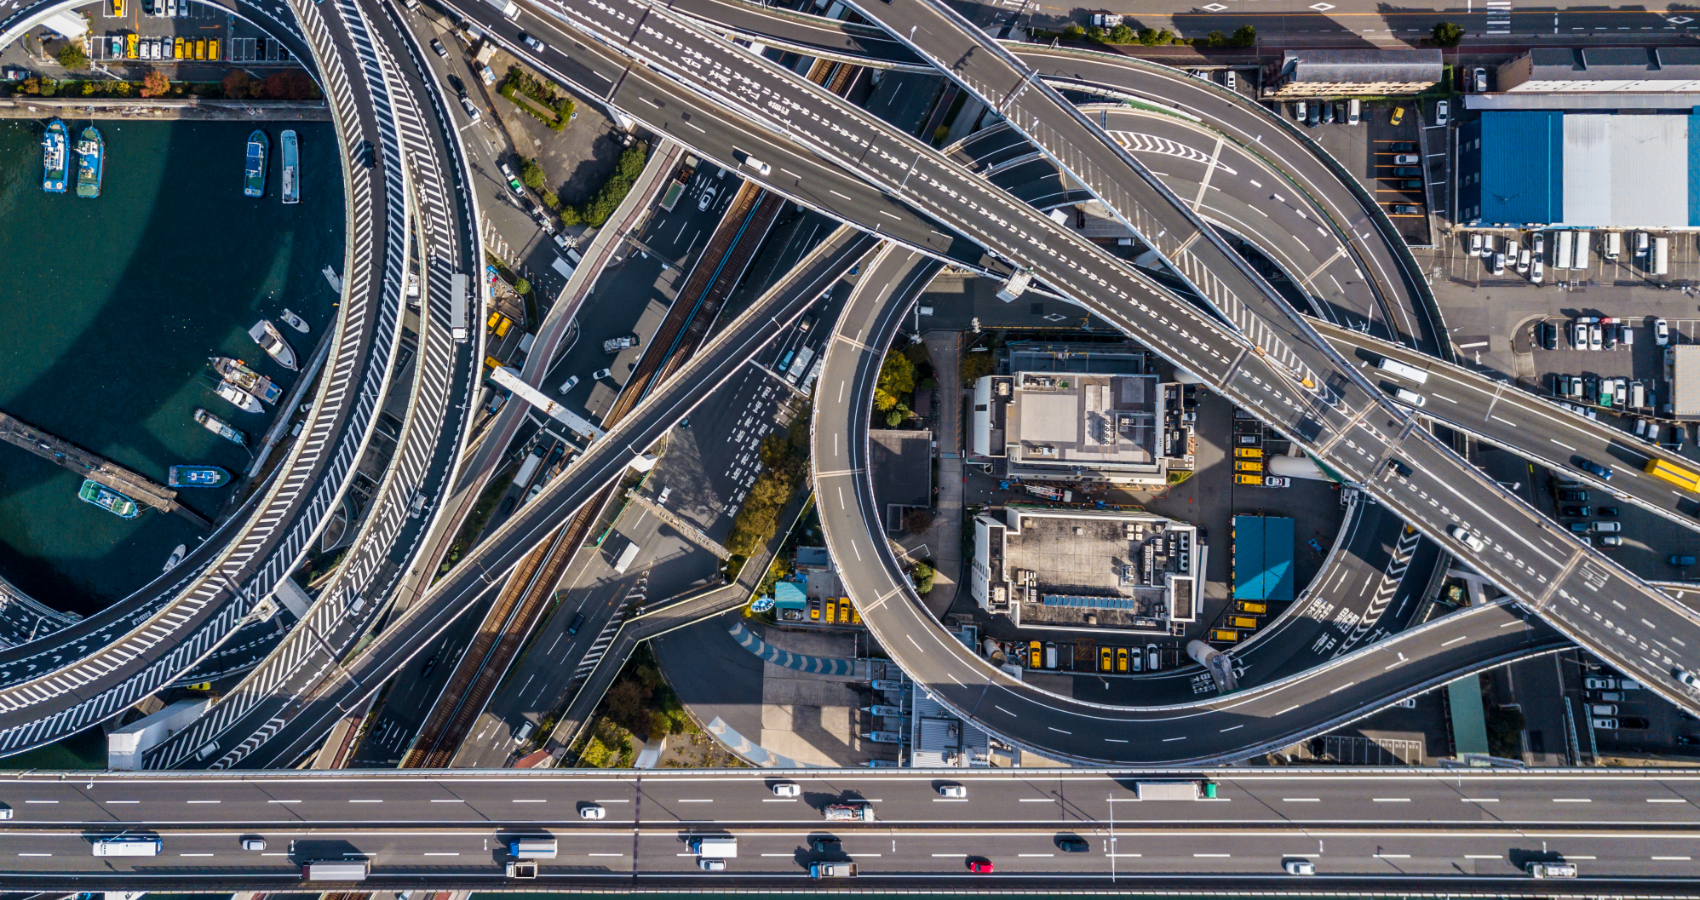 Top down view of a busy highway